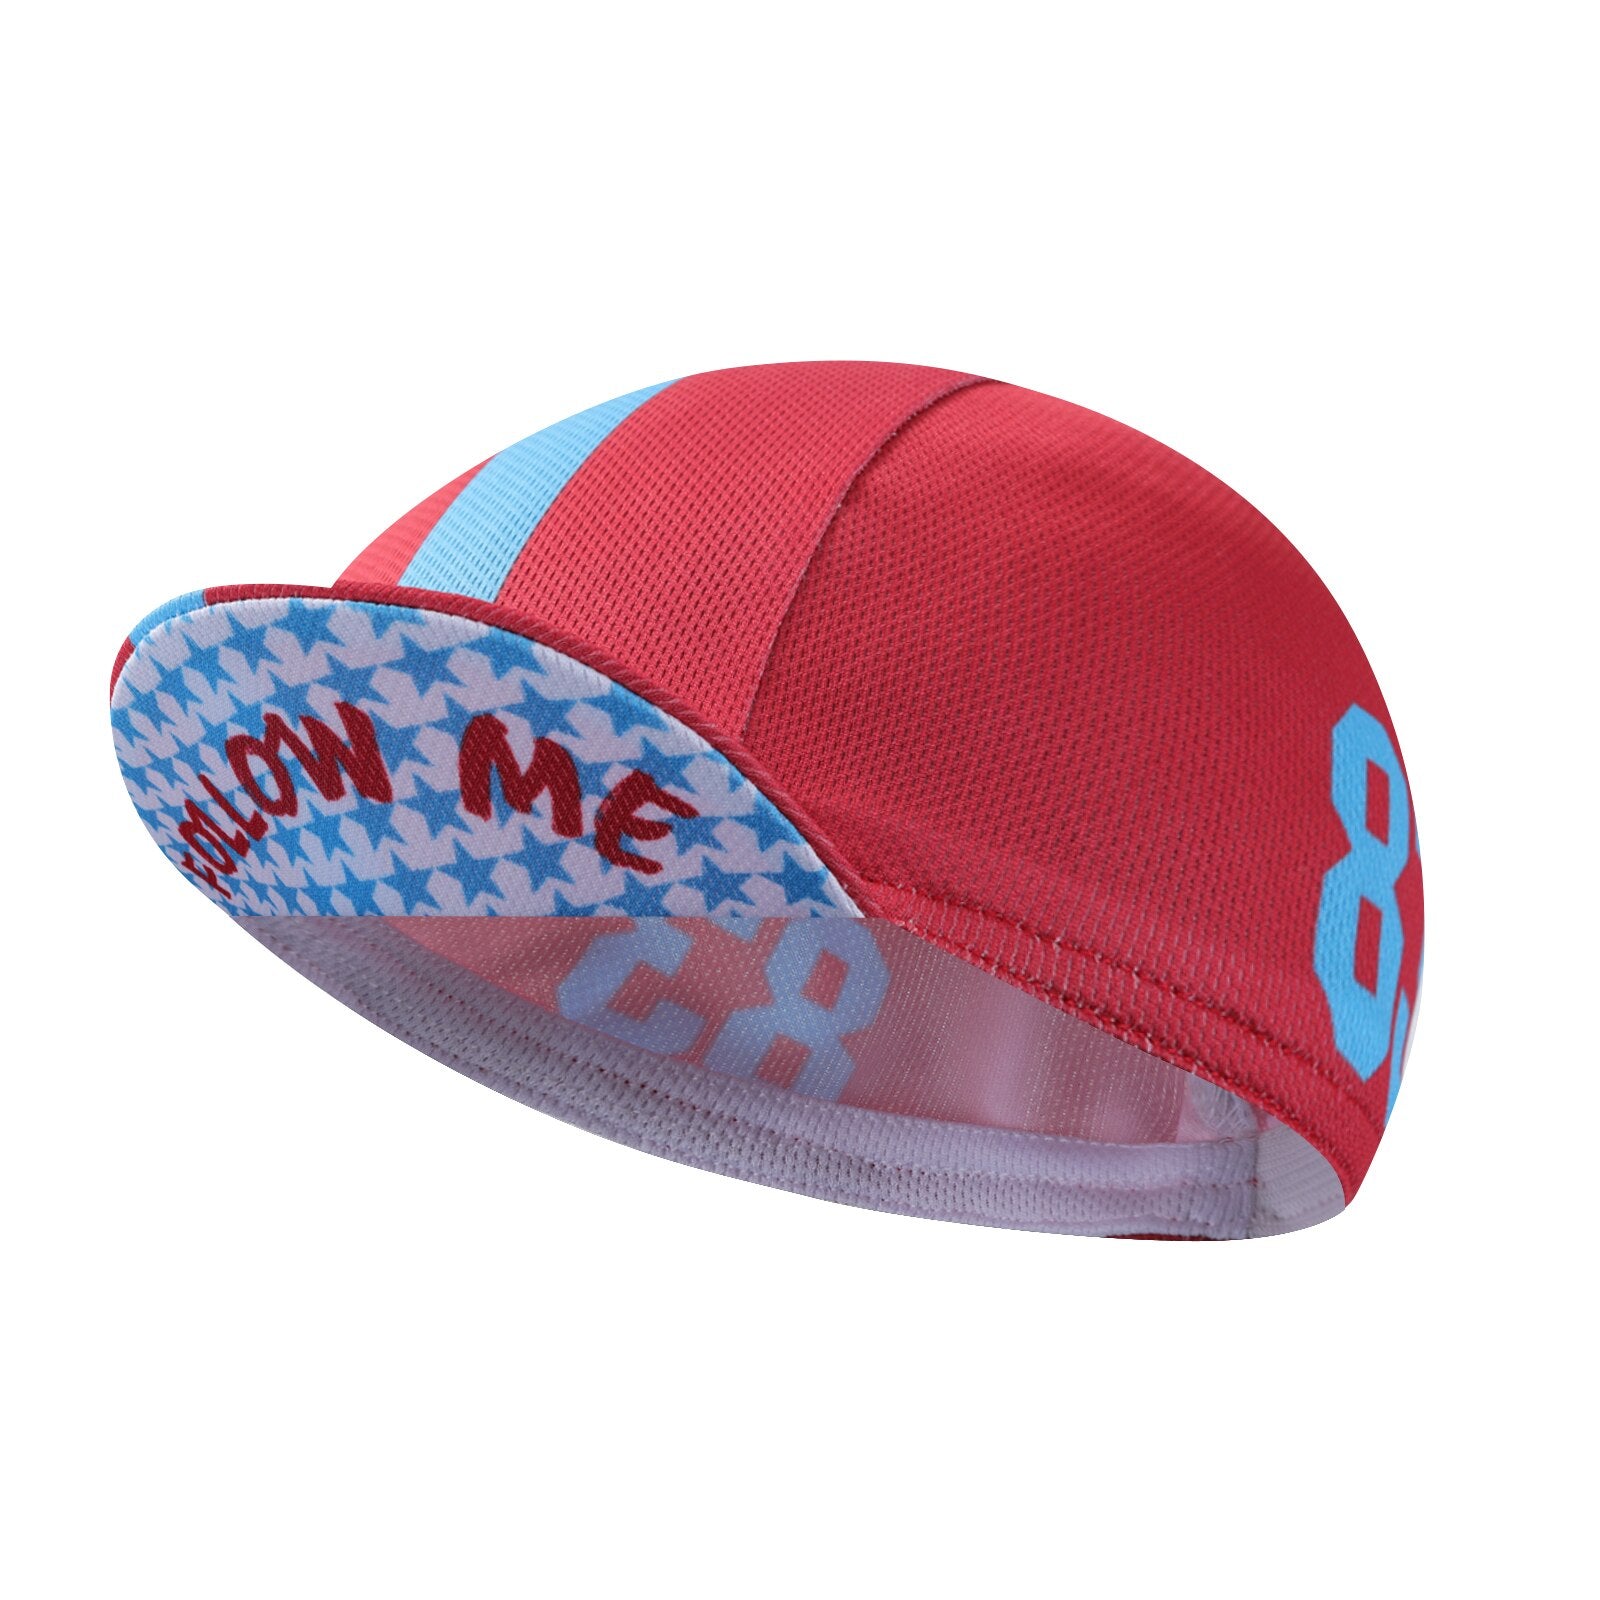 Men's Cycling Cap - Polyester Cycling Hat-Under Helmet - Cycling Helmet Liner Breathable&amp;Sweat Uptake